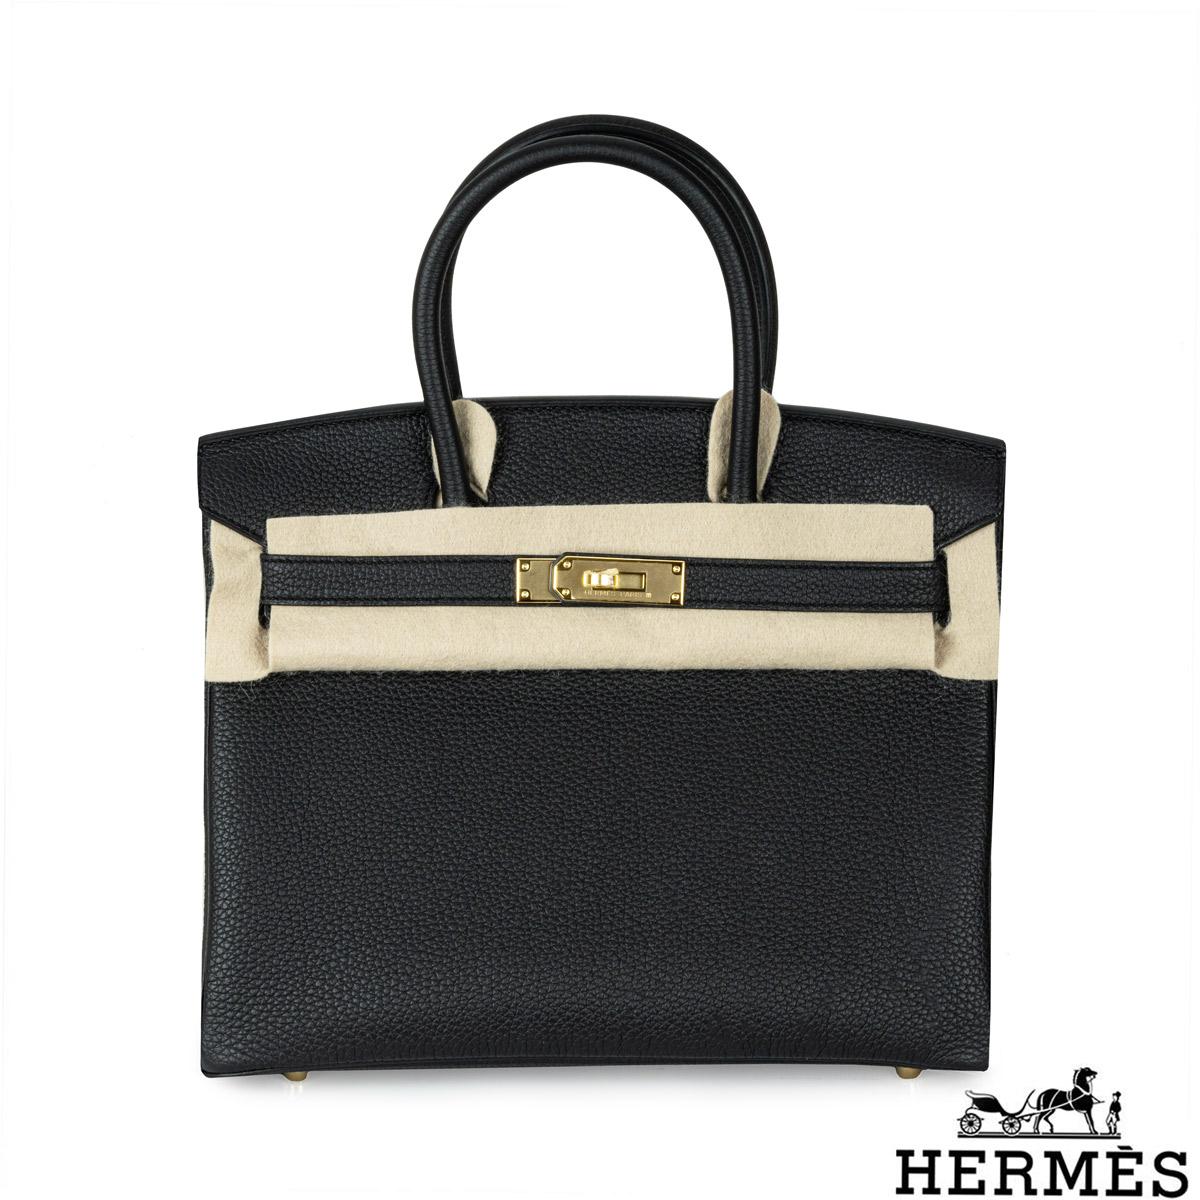 An amazing Hermès 30cm Birkin bag. The exterior of this Birkin is in Noir Piel de Becerro Togo leather with tonal stitching. It features gold tone hardware with two straps and front toggle closure. The interior features a zip pocket with an Hermès